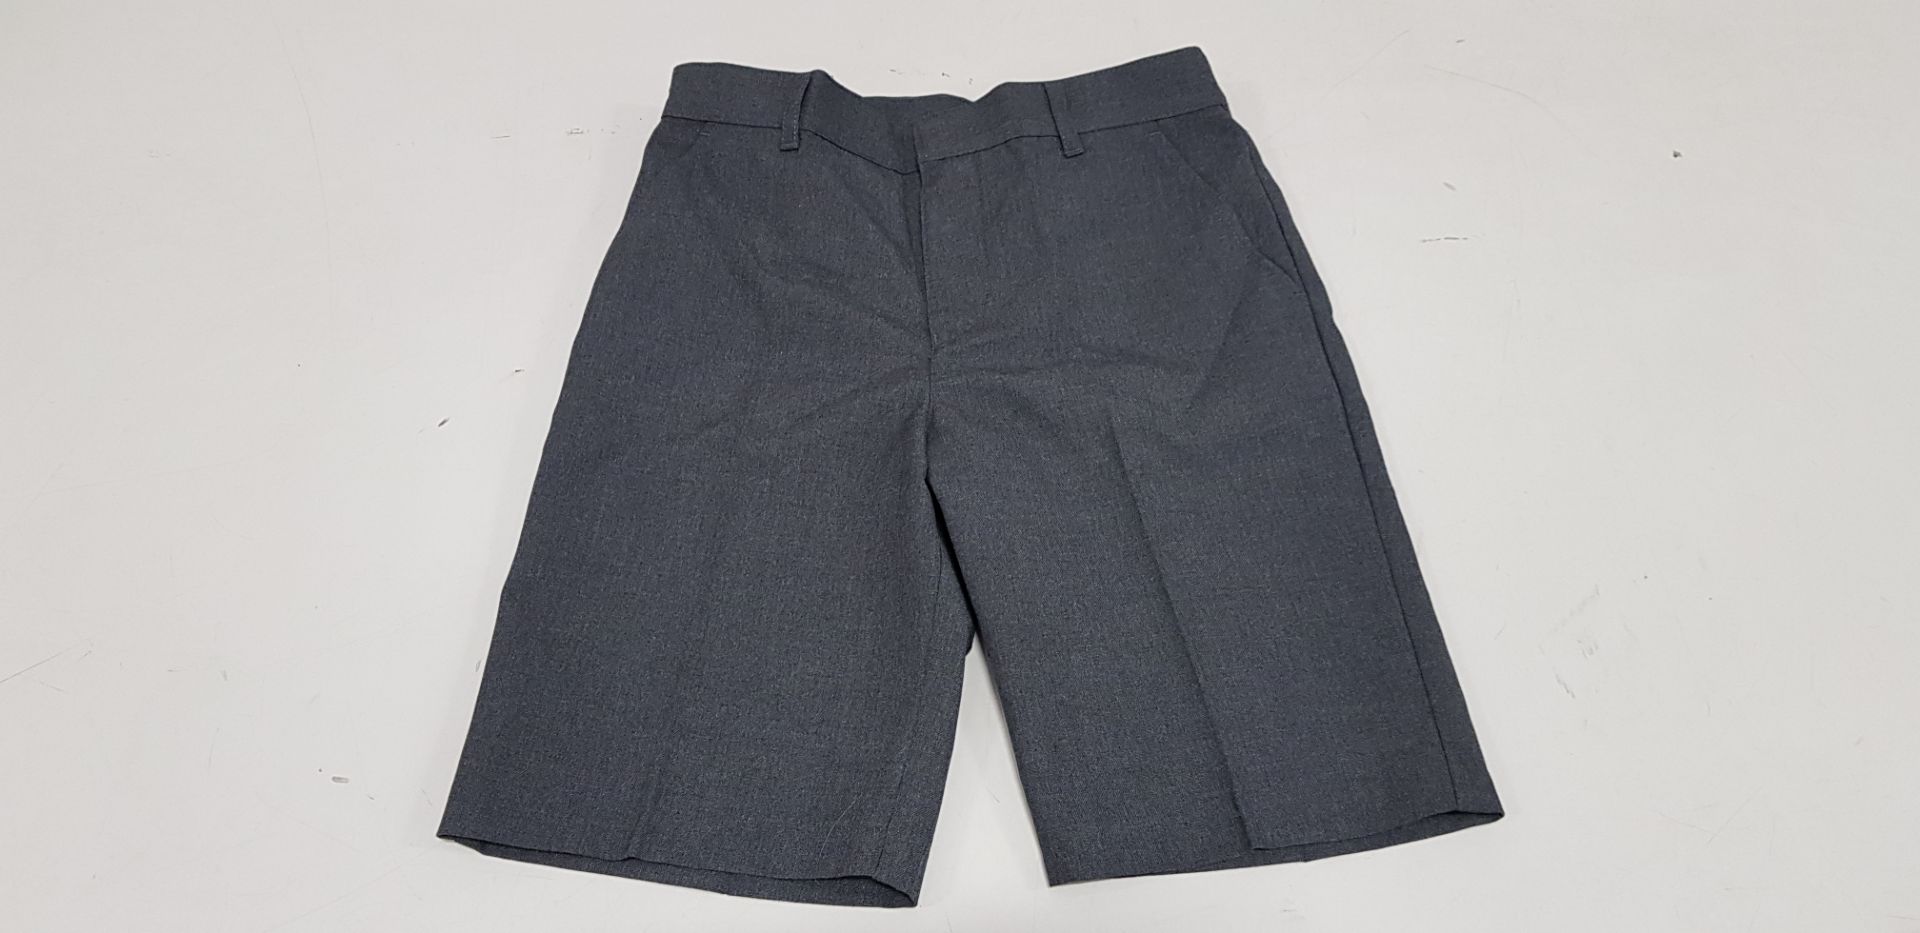 60 X BRAND NEW F&F PACKS OF 2 REGULAR FIT GREY BOYS SHORTS ALL IN SIZE (8-9 YRS ) RRP £ 7 .00 (